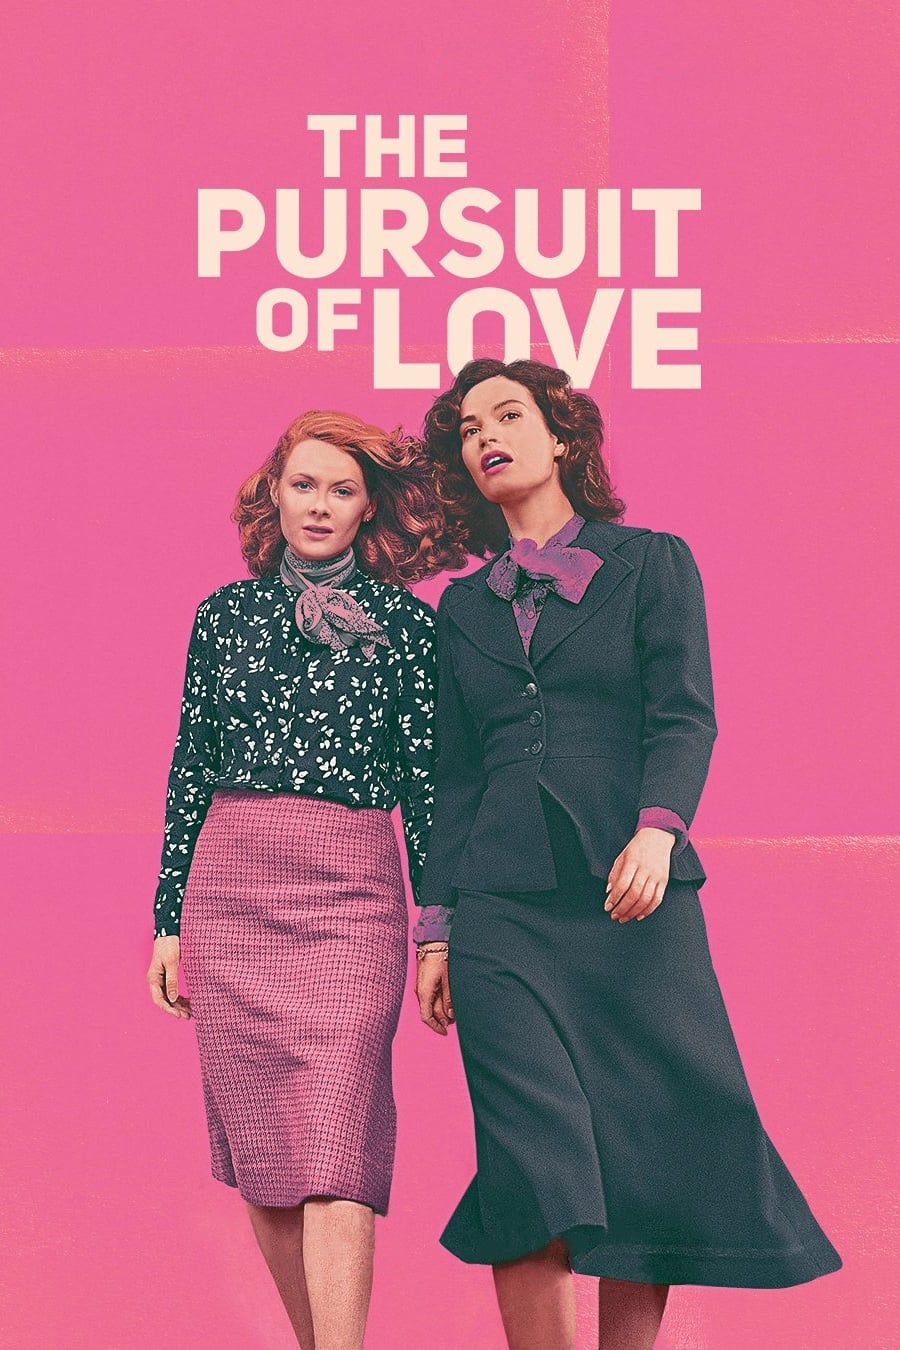 The Pursuit of Love rating